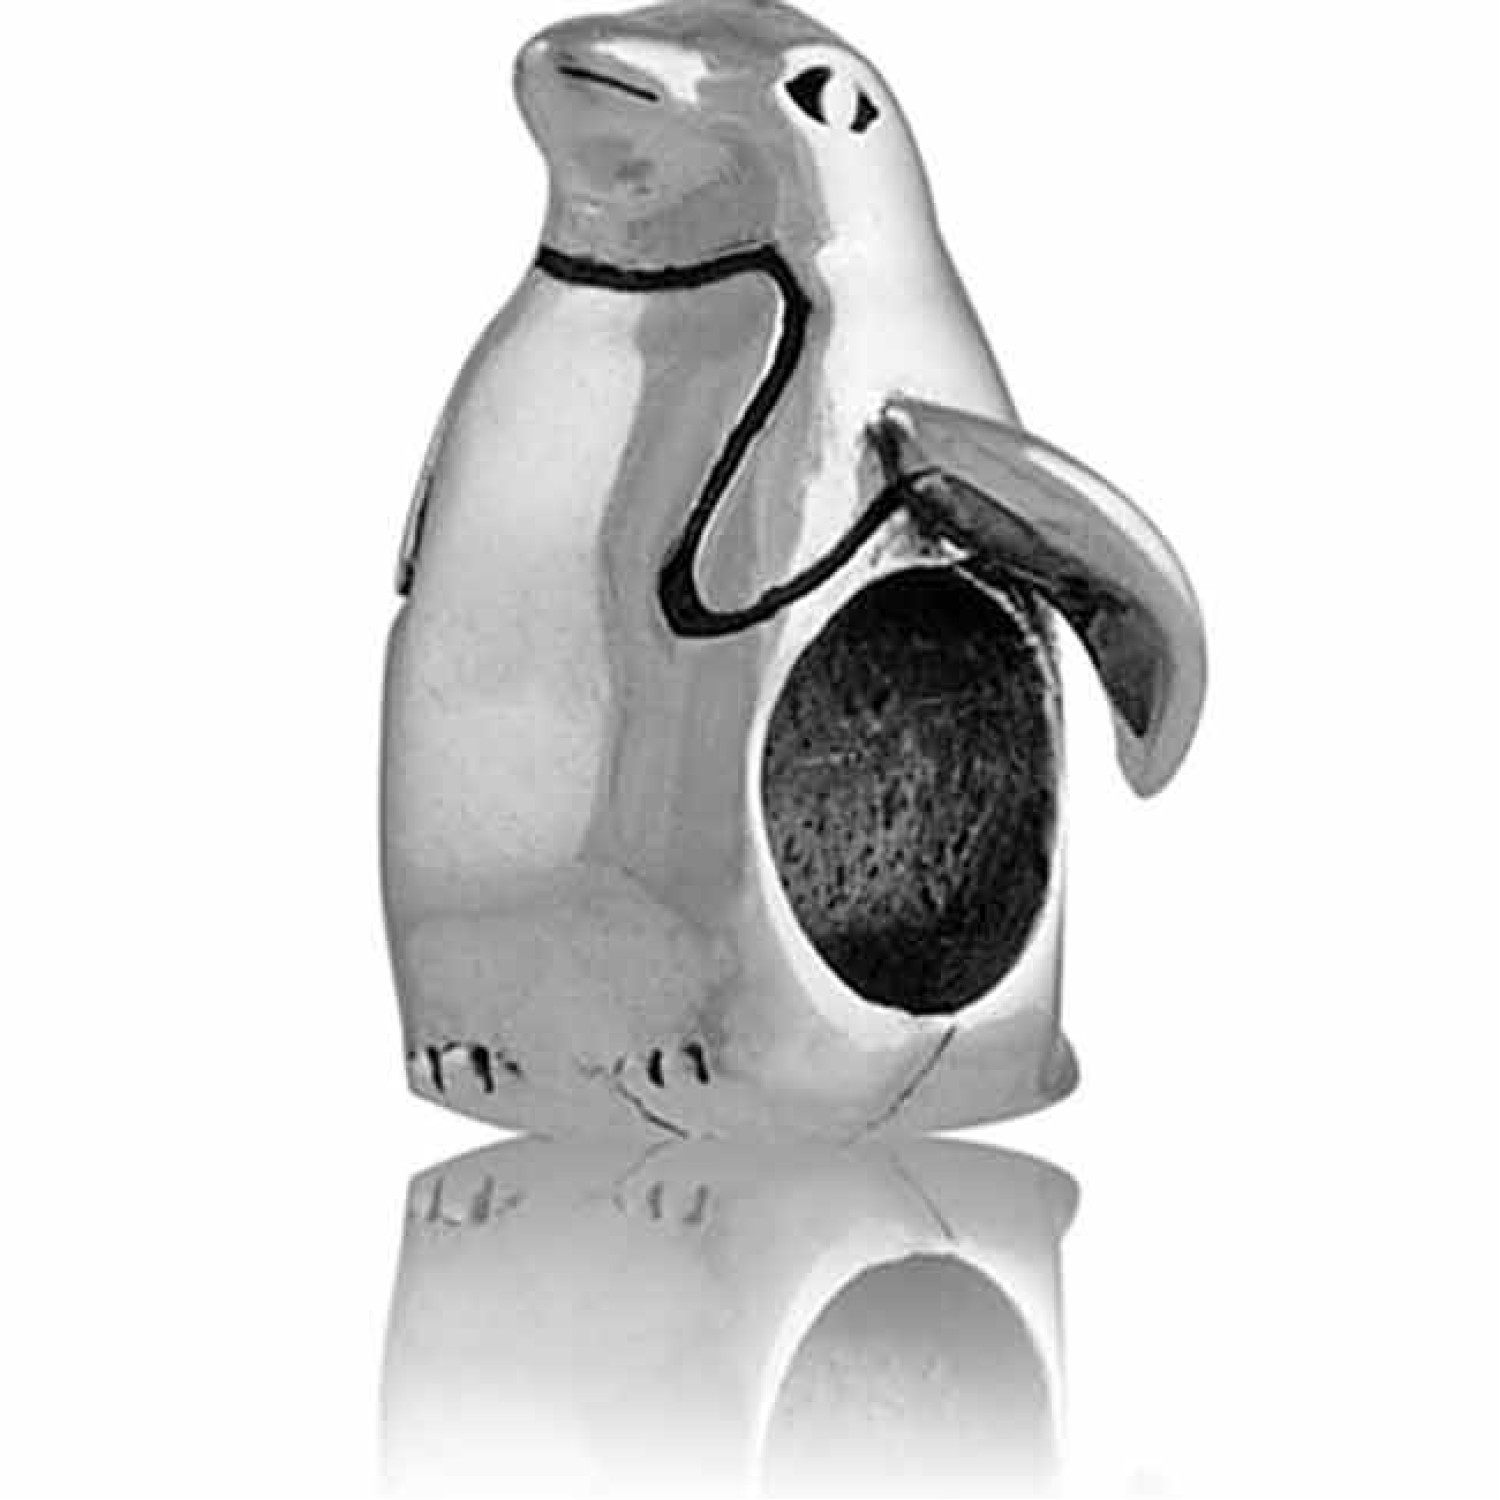 LK121 - Evolve NZ Charms Penguin - Happy Feet. On June 20 2011, a juvenile Emperor penguin was found alive, washed up on Peka Peka Beach, a stretch of coast not far from New Zealand’s capital city, Wellington. Nicknamed ‘Happy Feet’ by the woman who @chri